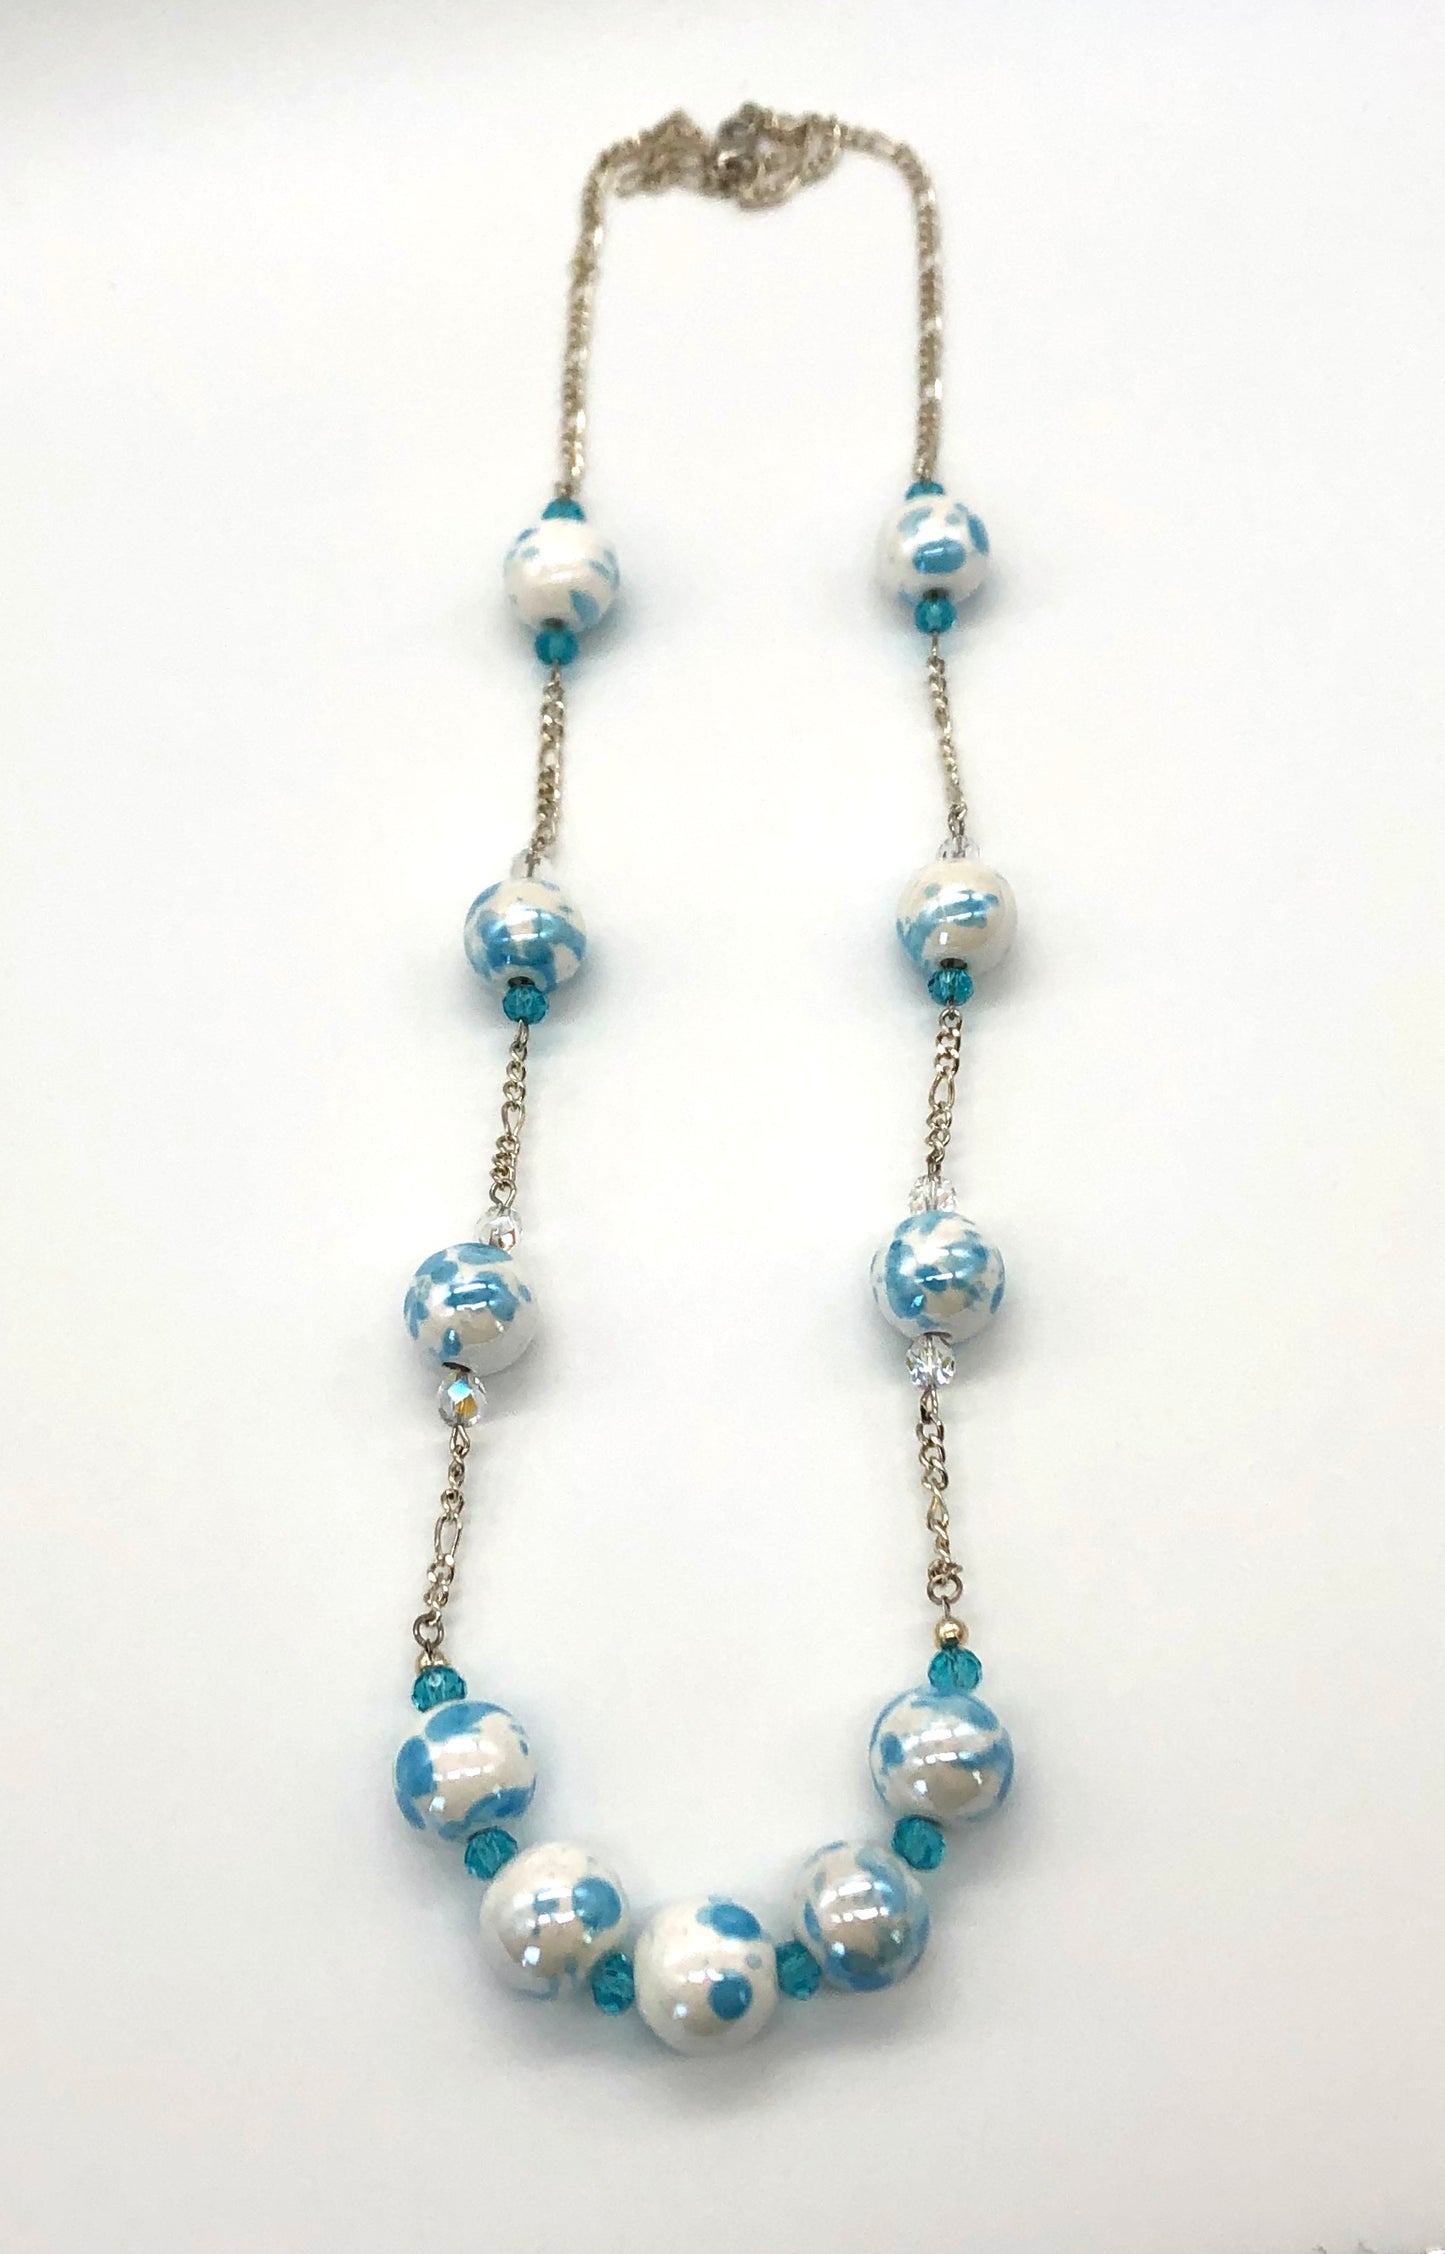 Aqua blue and white marble beaded chain necklace